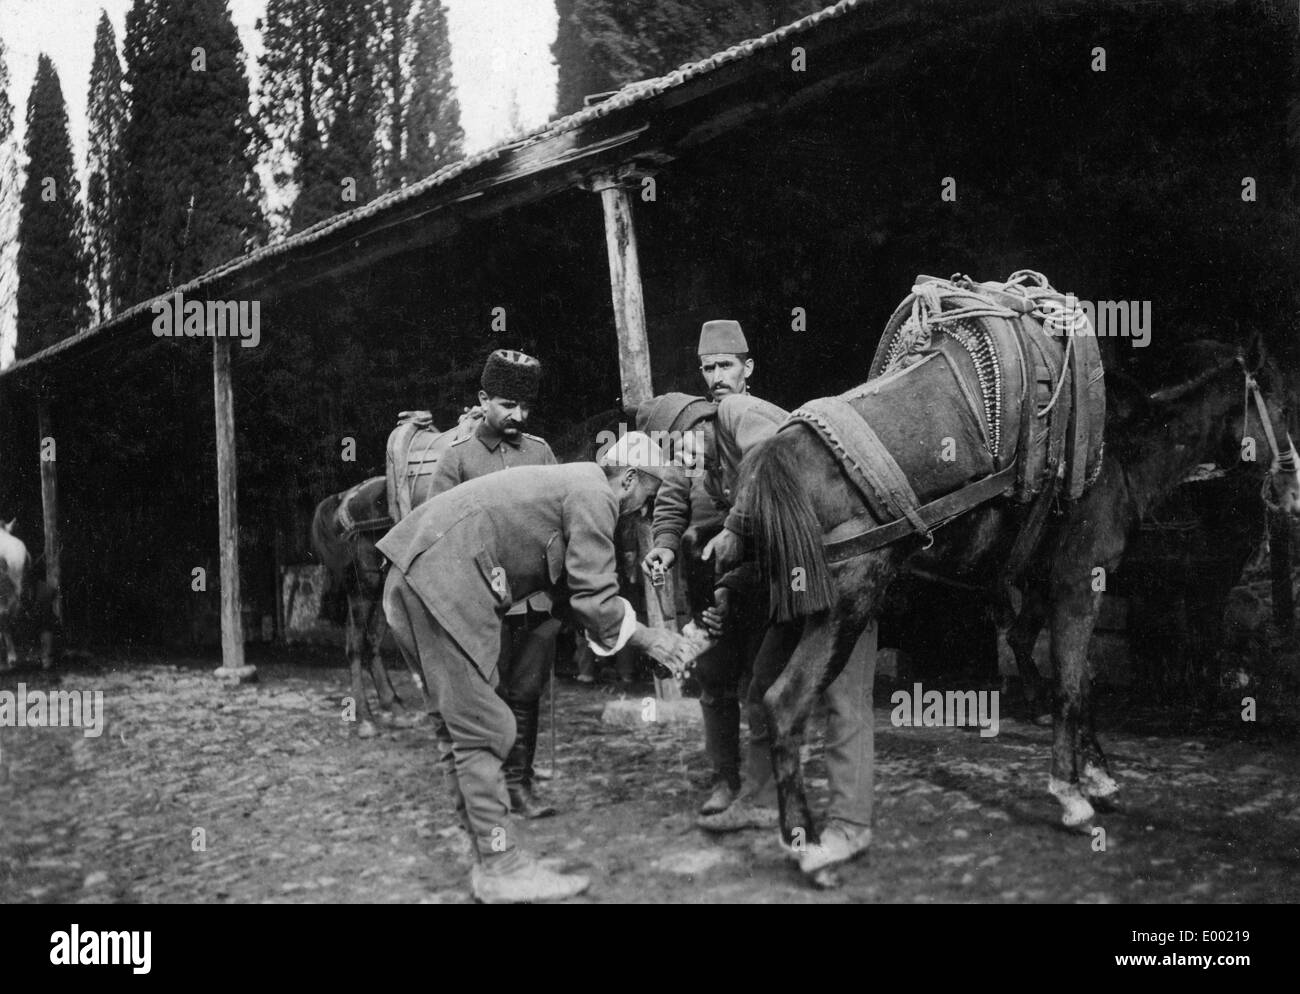 Horse of the Turkish troops in World War I Stock Photo